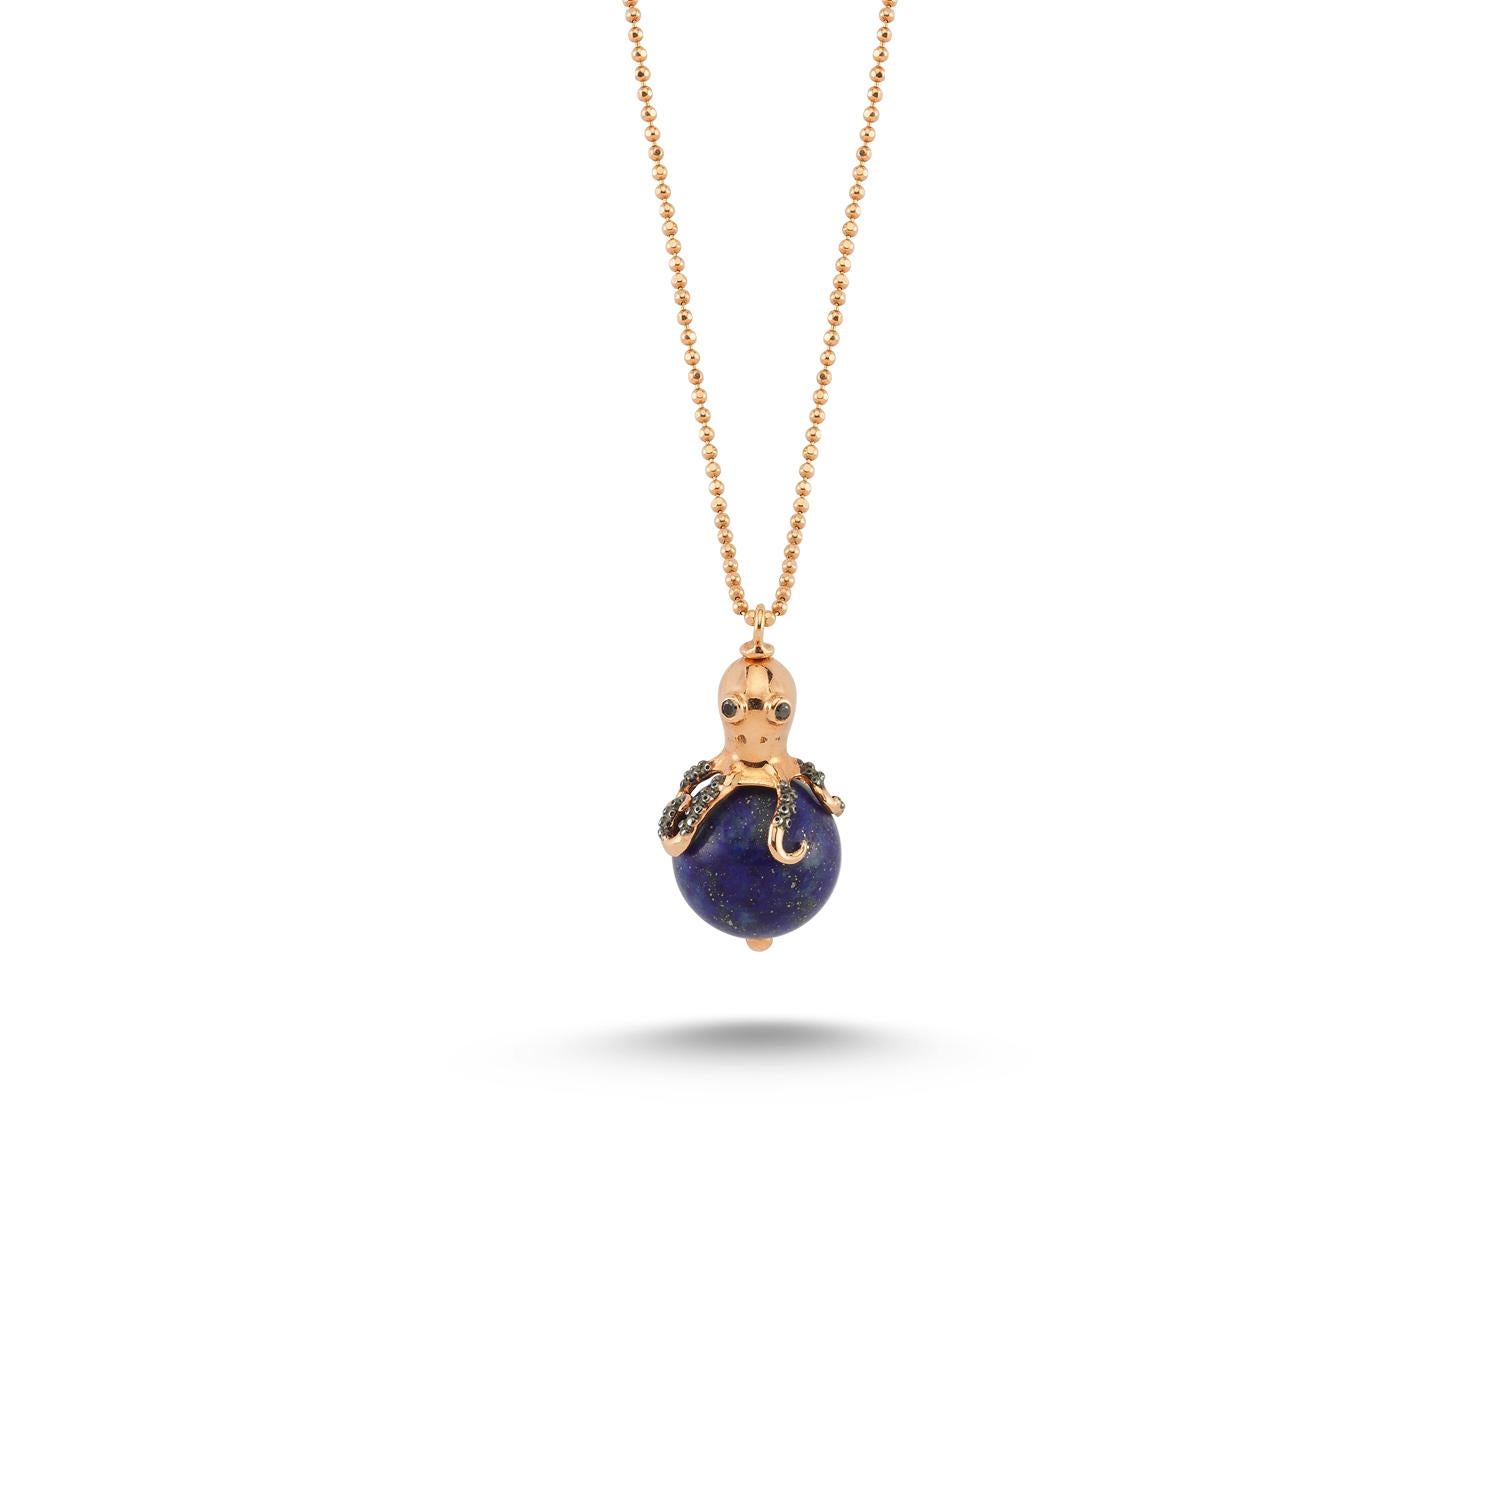 Nerice lapis mini octopus necklace in 14k rose gold by Selda Jewellery

Additional Information:-
Collection: Treasures of The Sea Collection
14k Rose gold
0.02ct Black diamond
Pendant height 2cm
Chain length 44cm